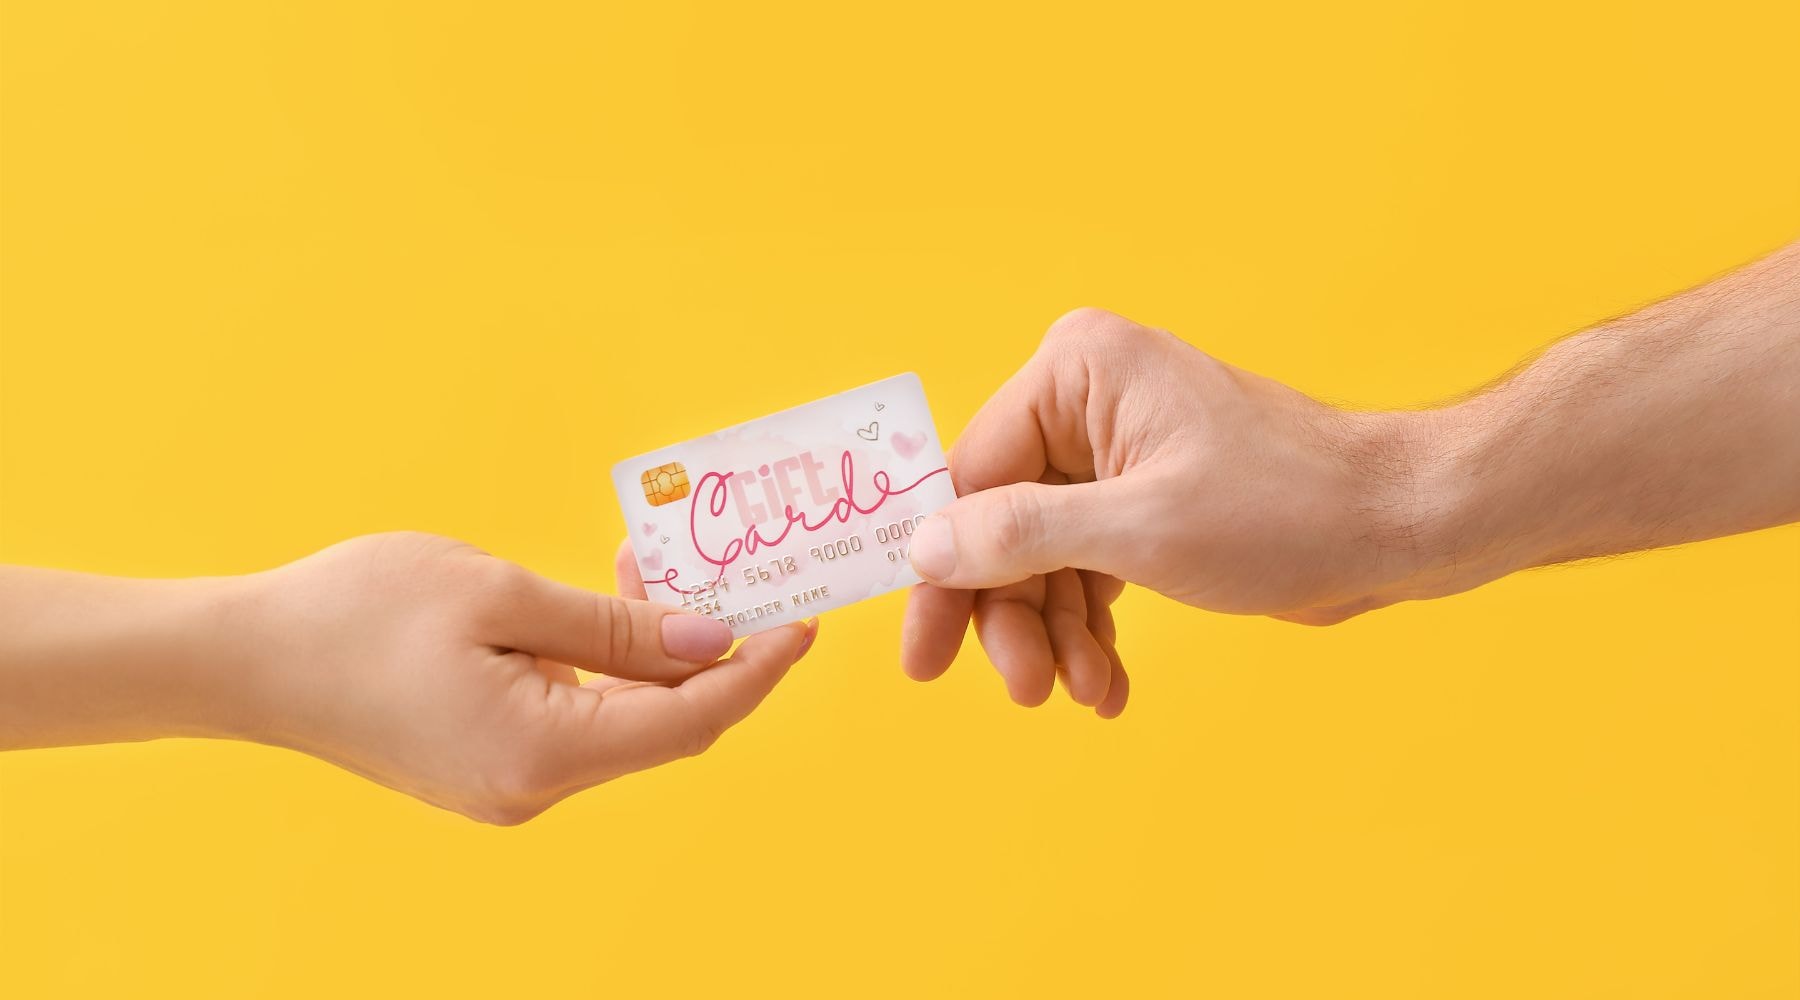 Two hands exchanging a gift card against a bright yellow background.